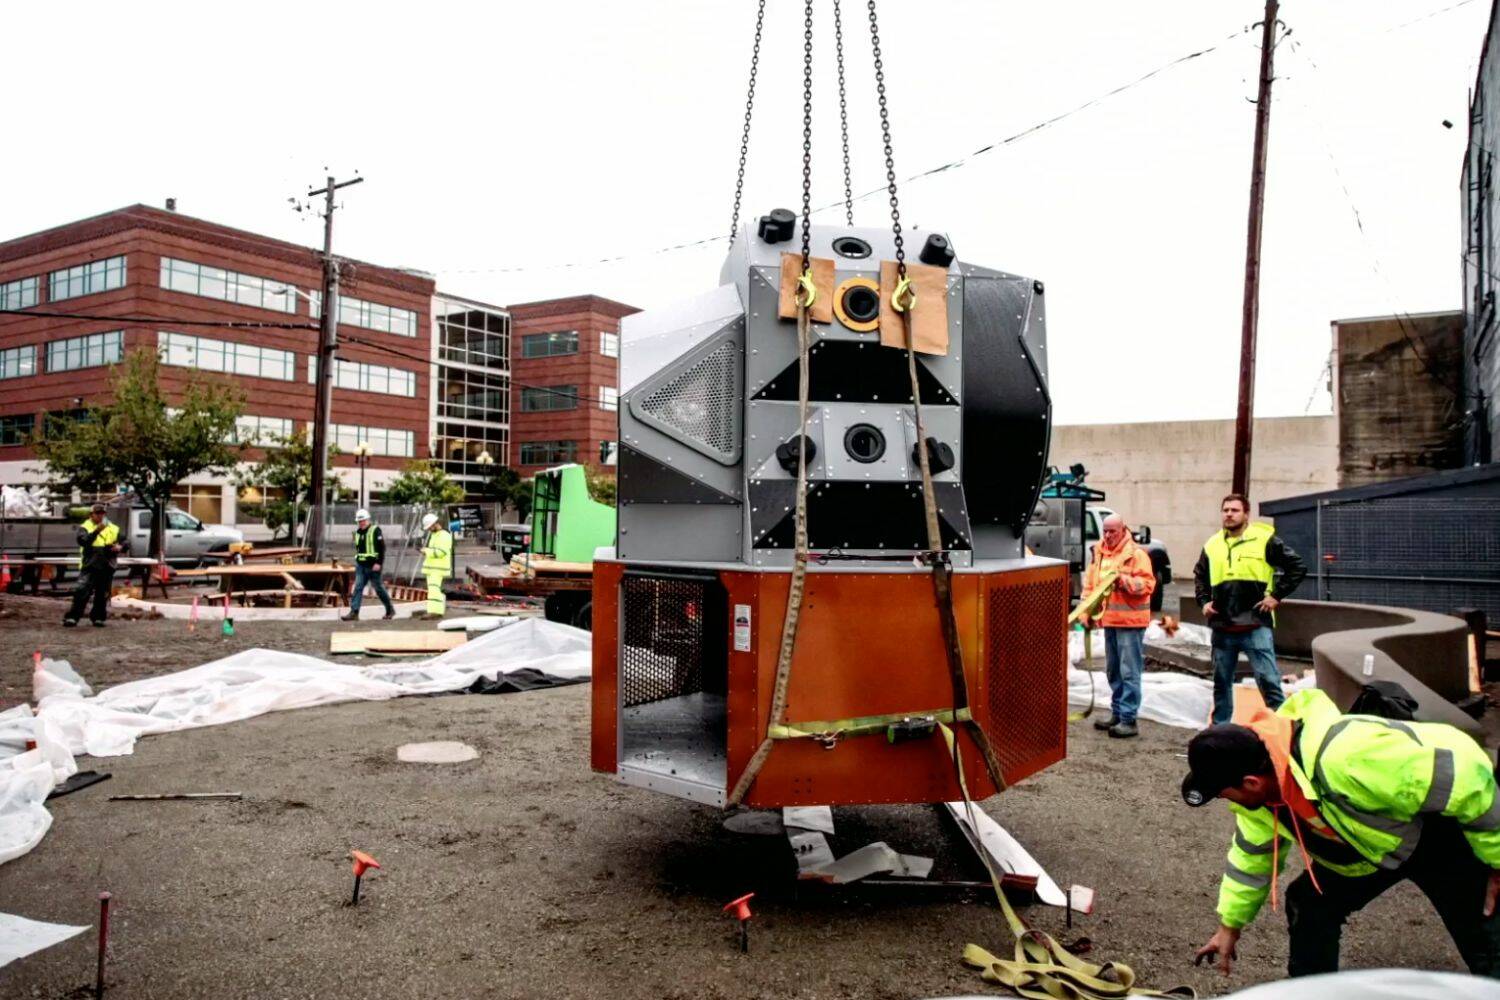 Elements of the city’s interactive space-themed park being lowered in. (Screenshot from Kent Youtube page)